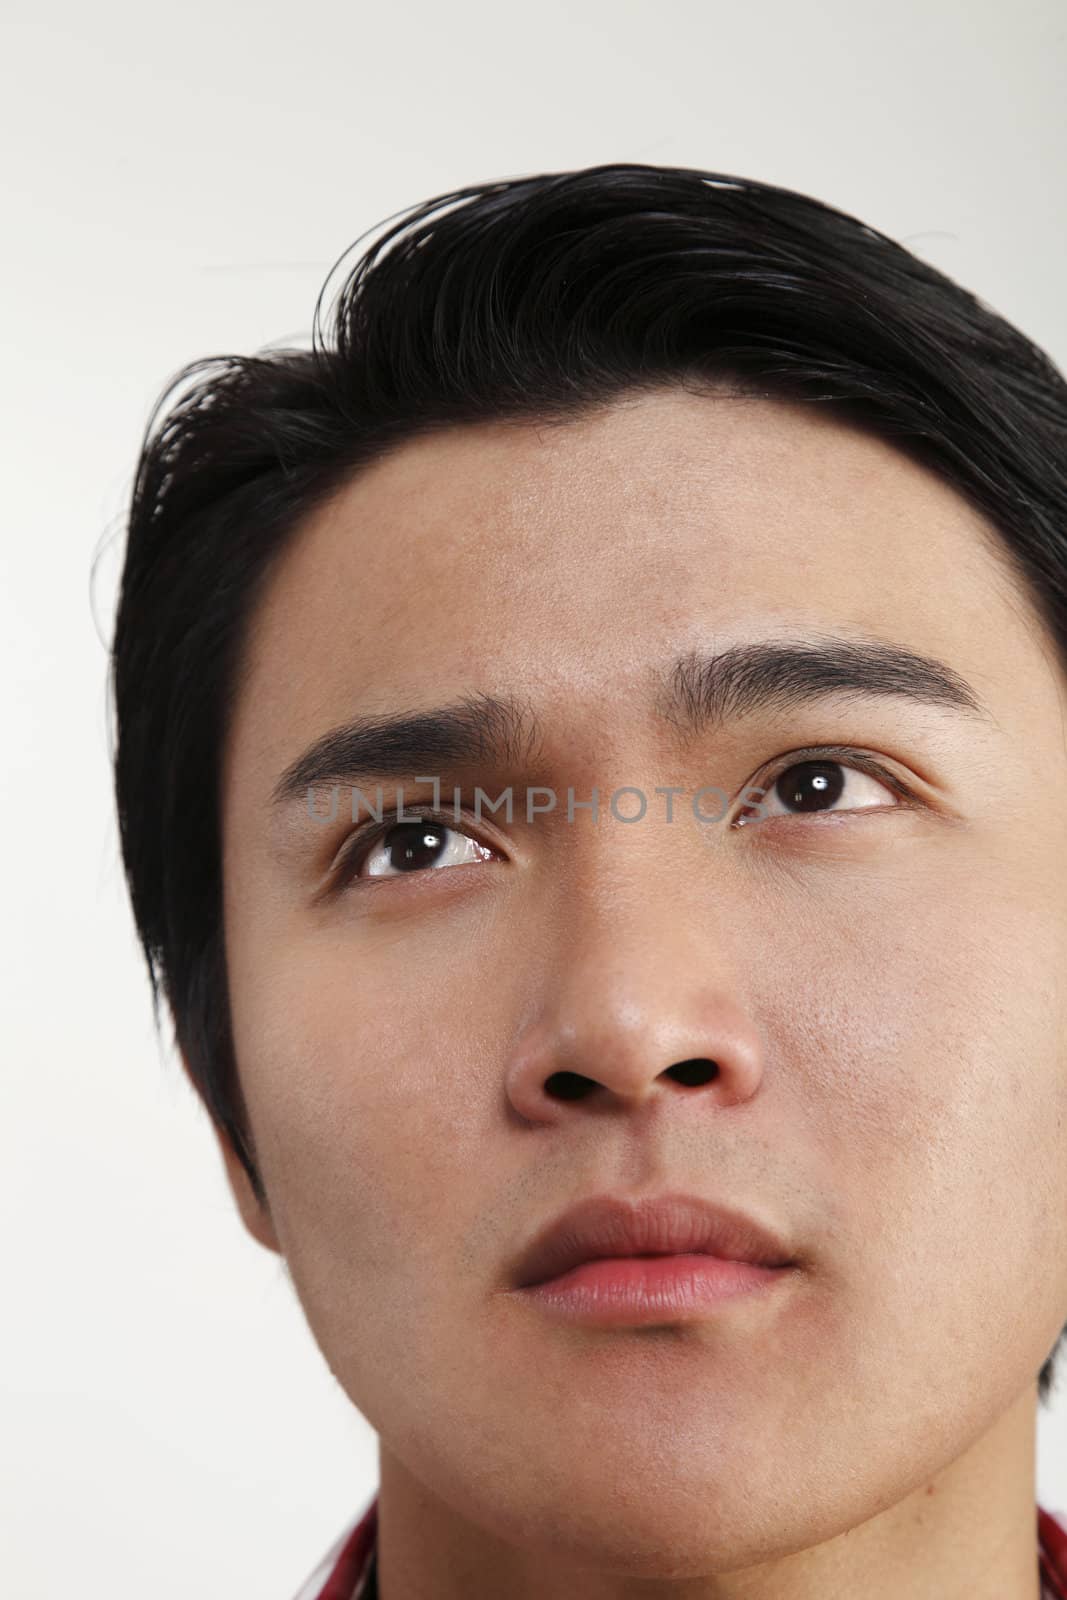 Man looking up with worried expression